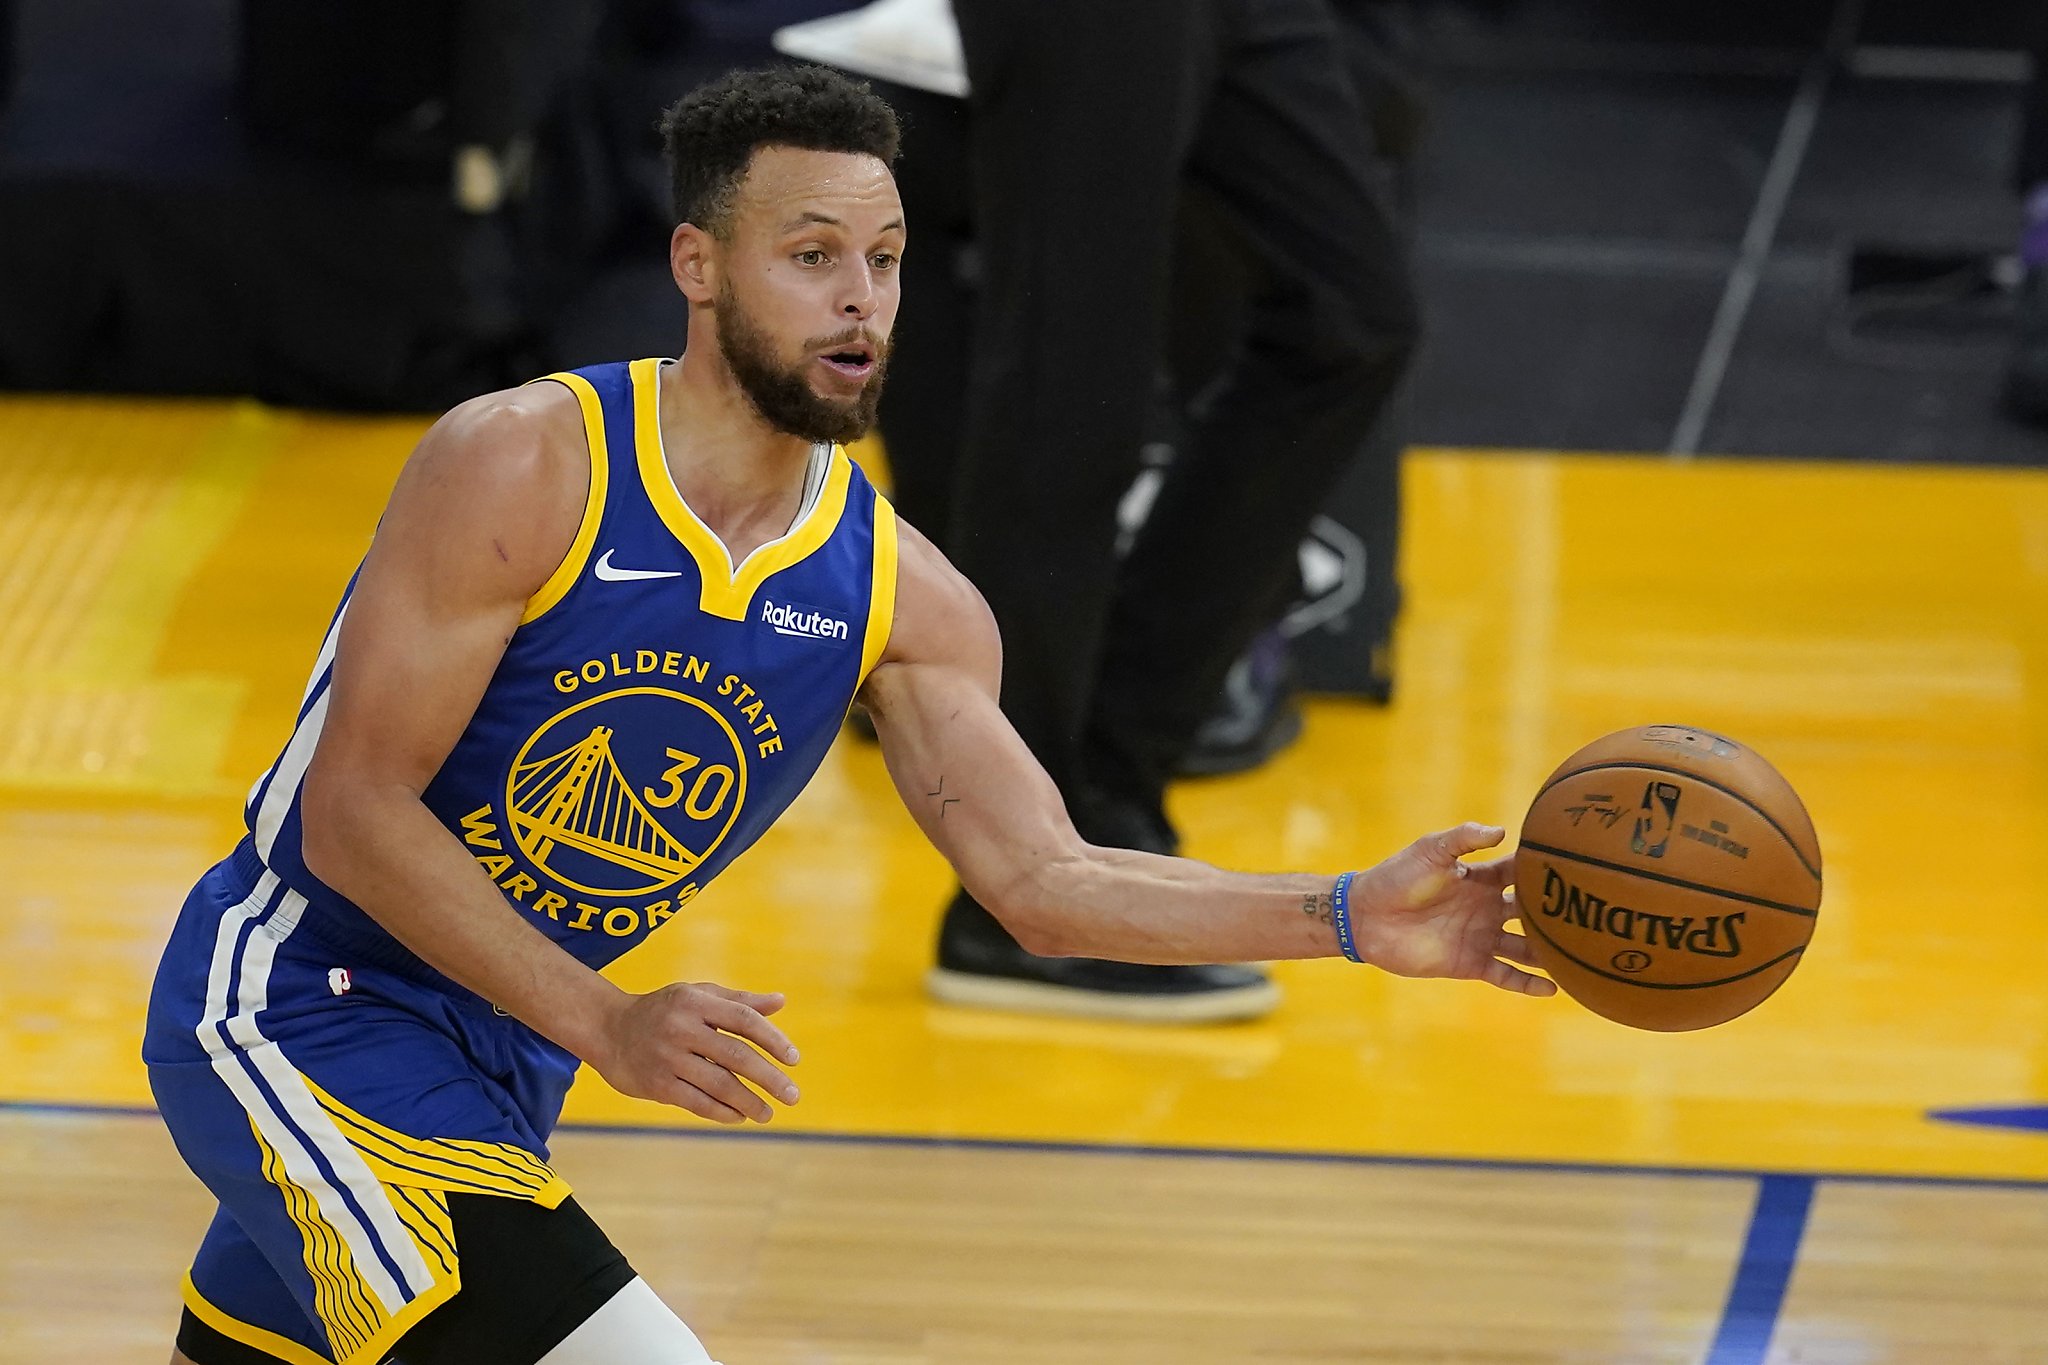 Warriors' Stephen Curry passes dad Dell Curry in career points